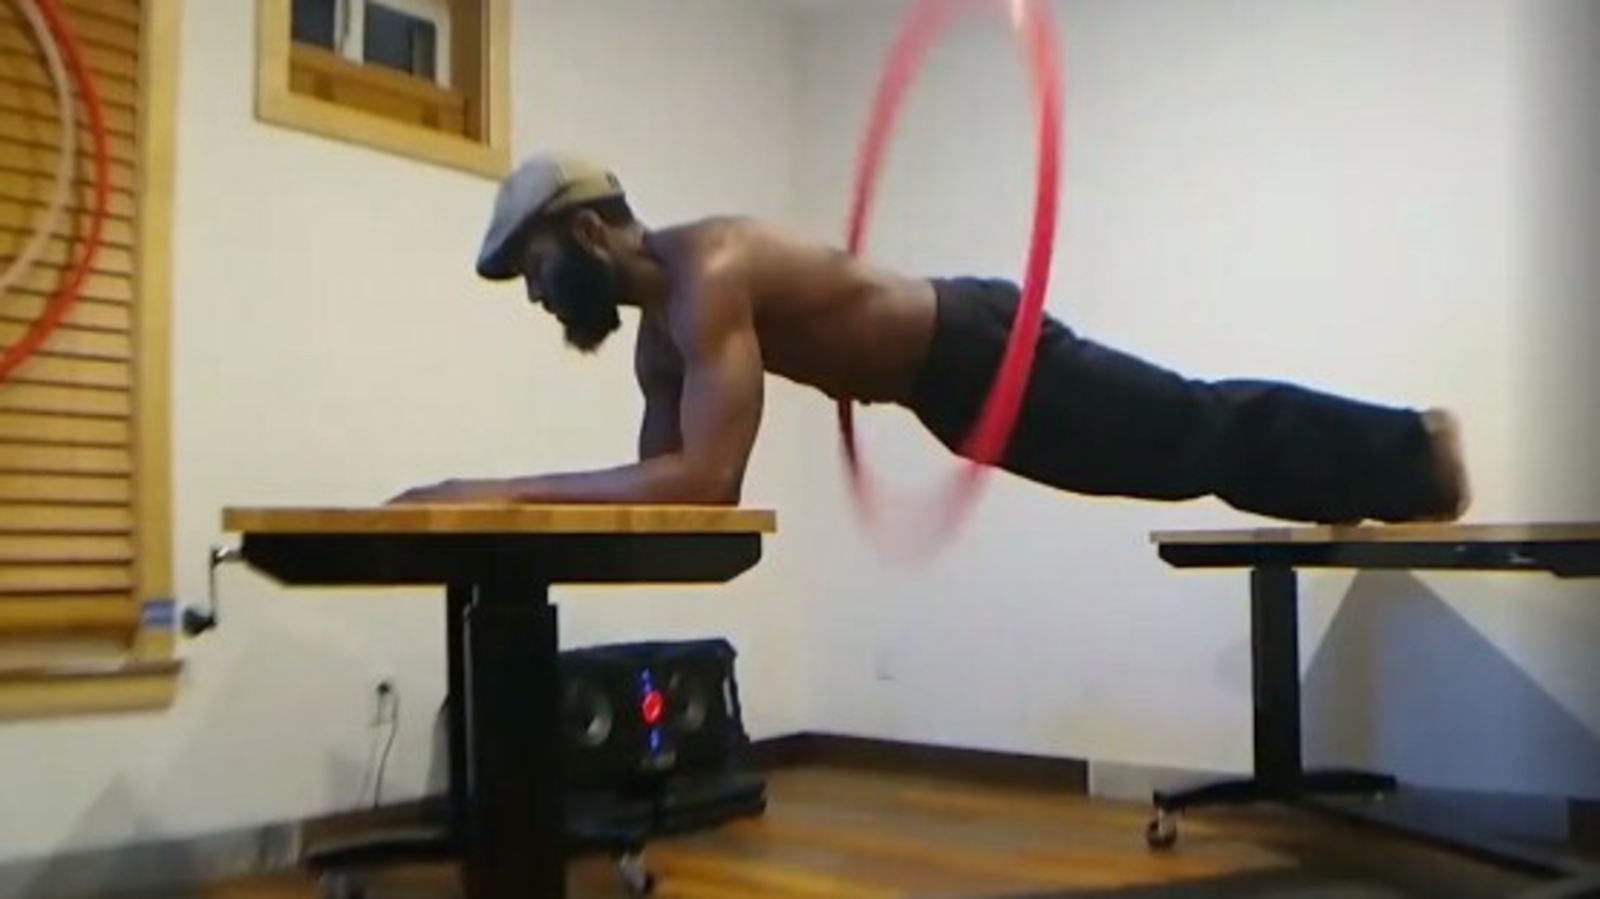 US man hula hoops in abdominal plank position, creates record. Watch viral video